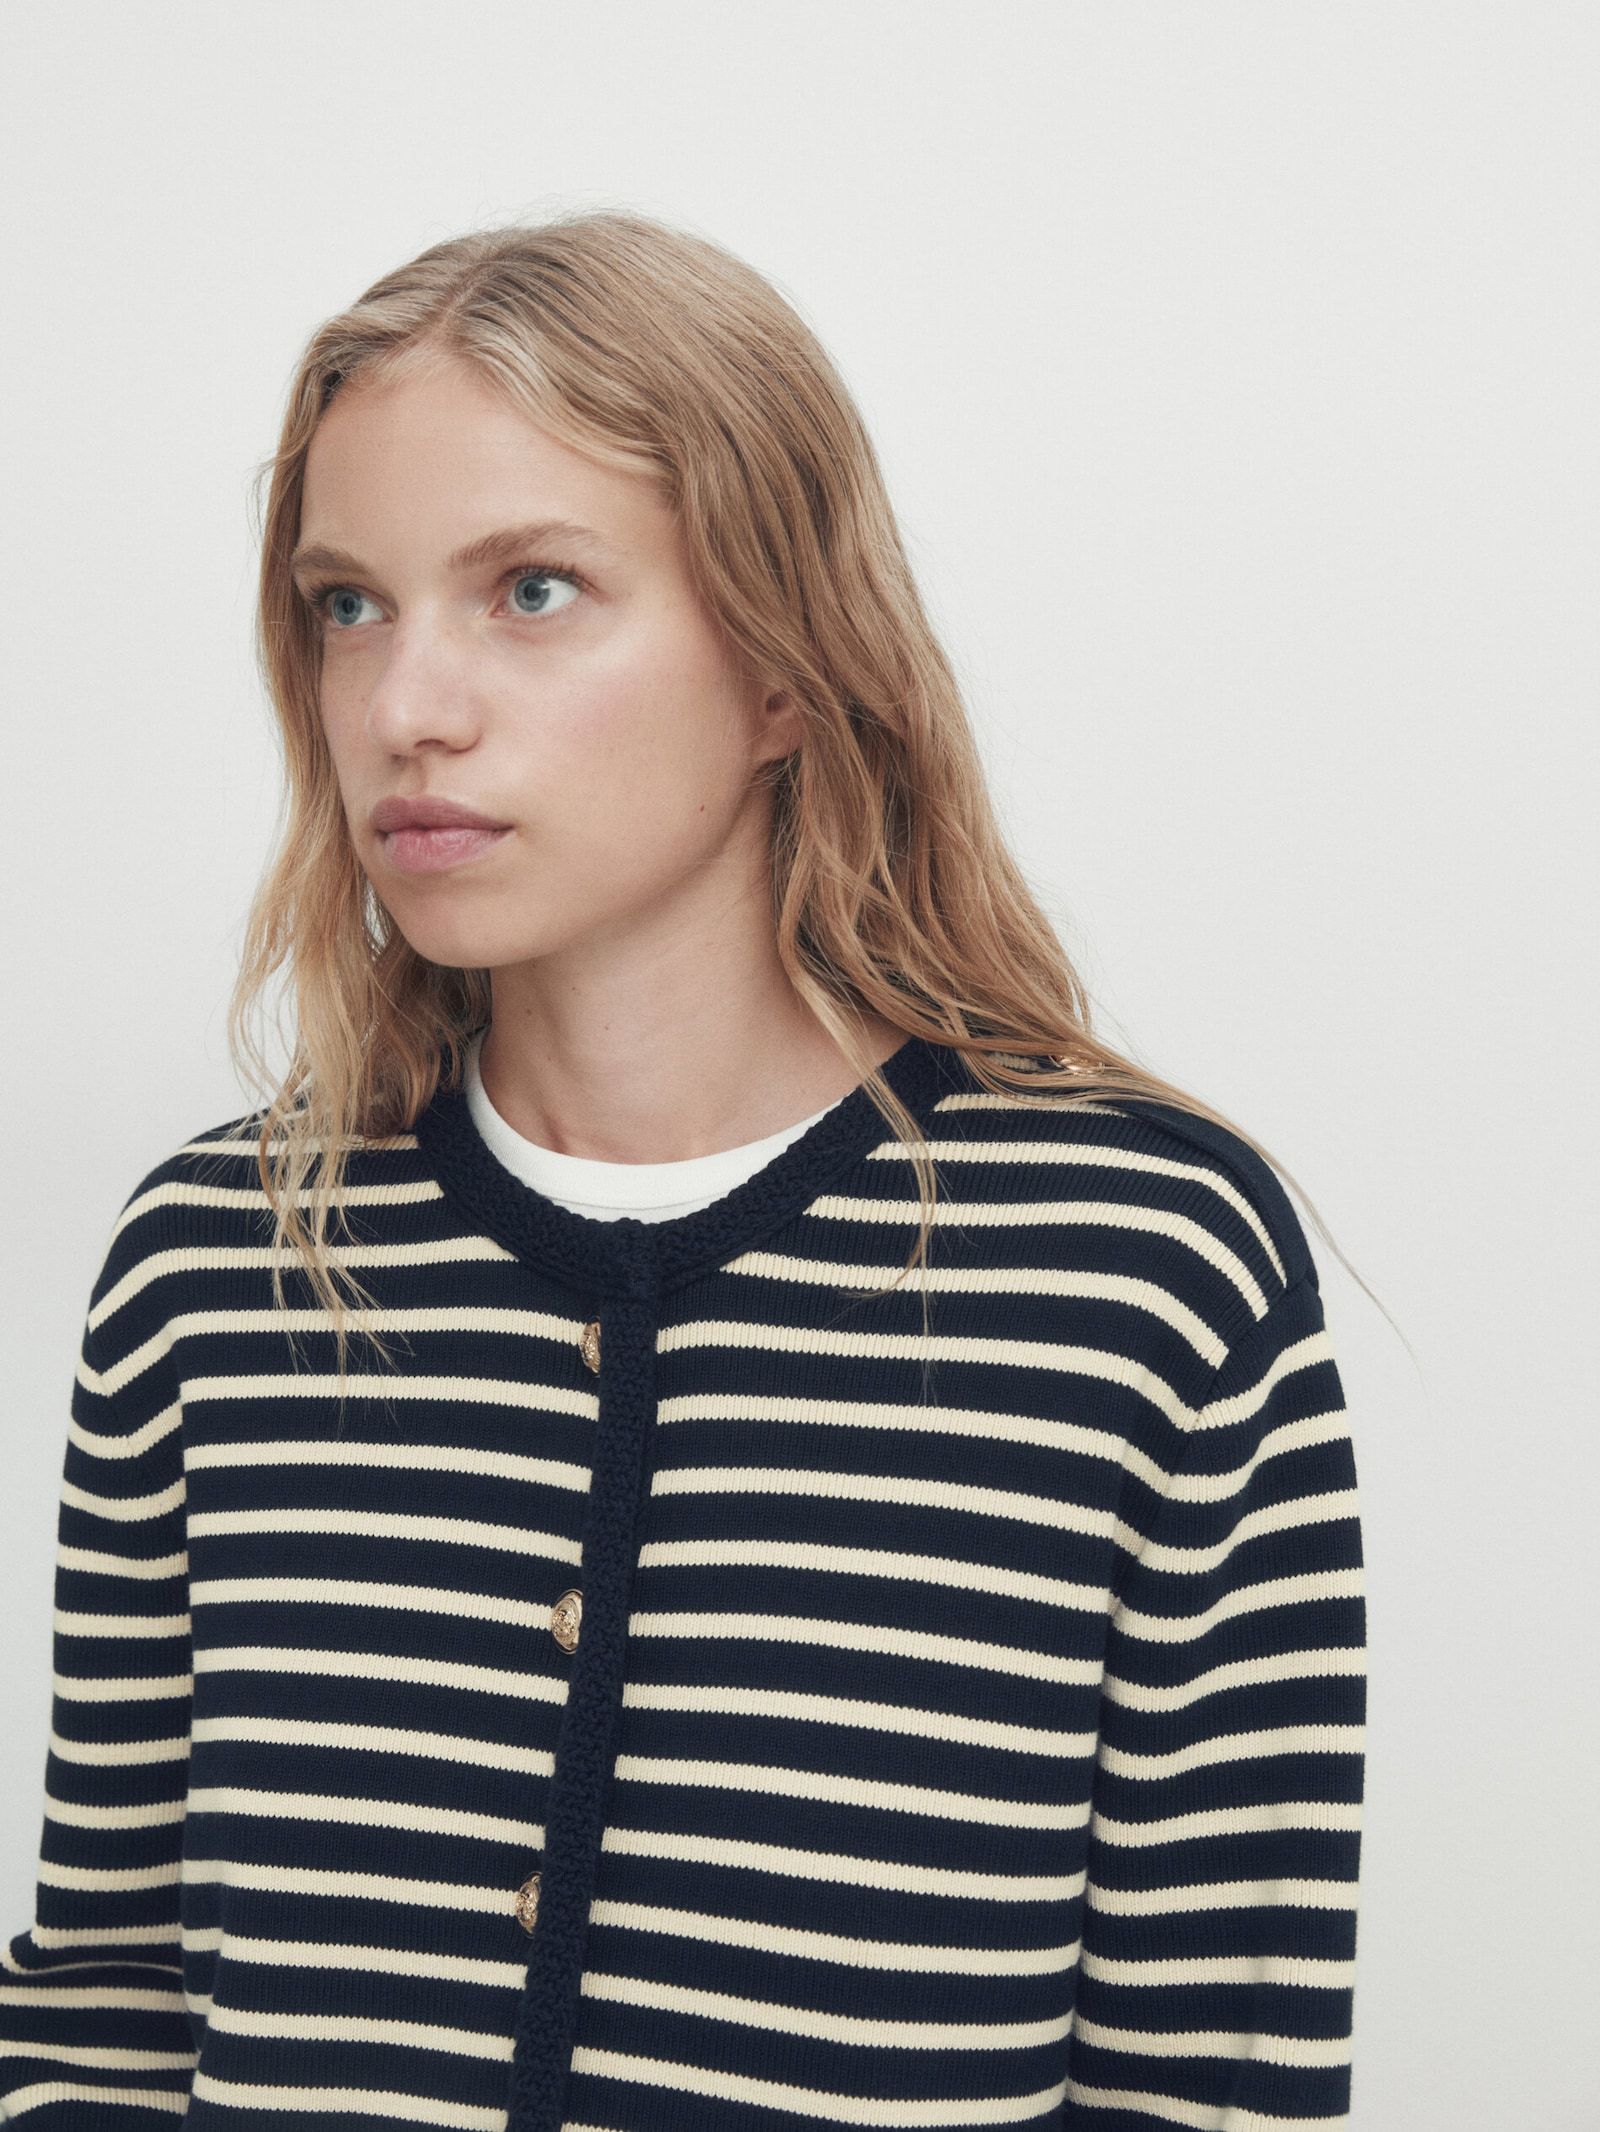 Striped knit cardigan with button detail on shoulder | Massimo Dutti (US)